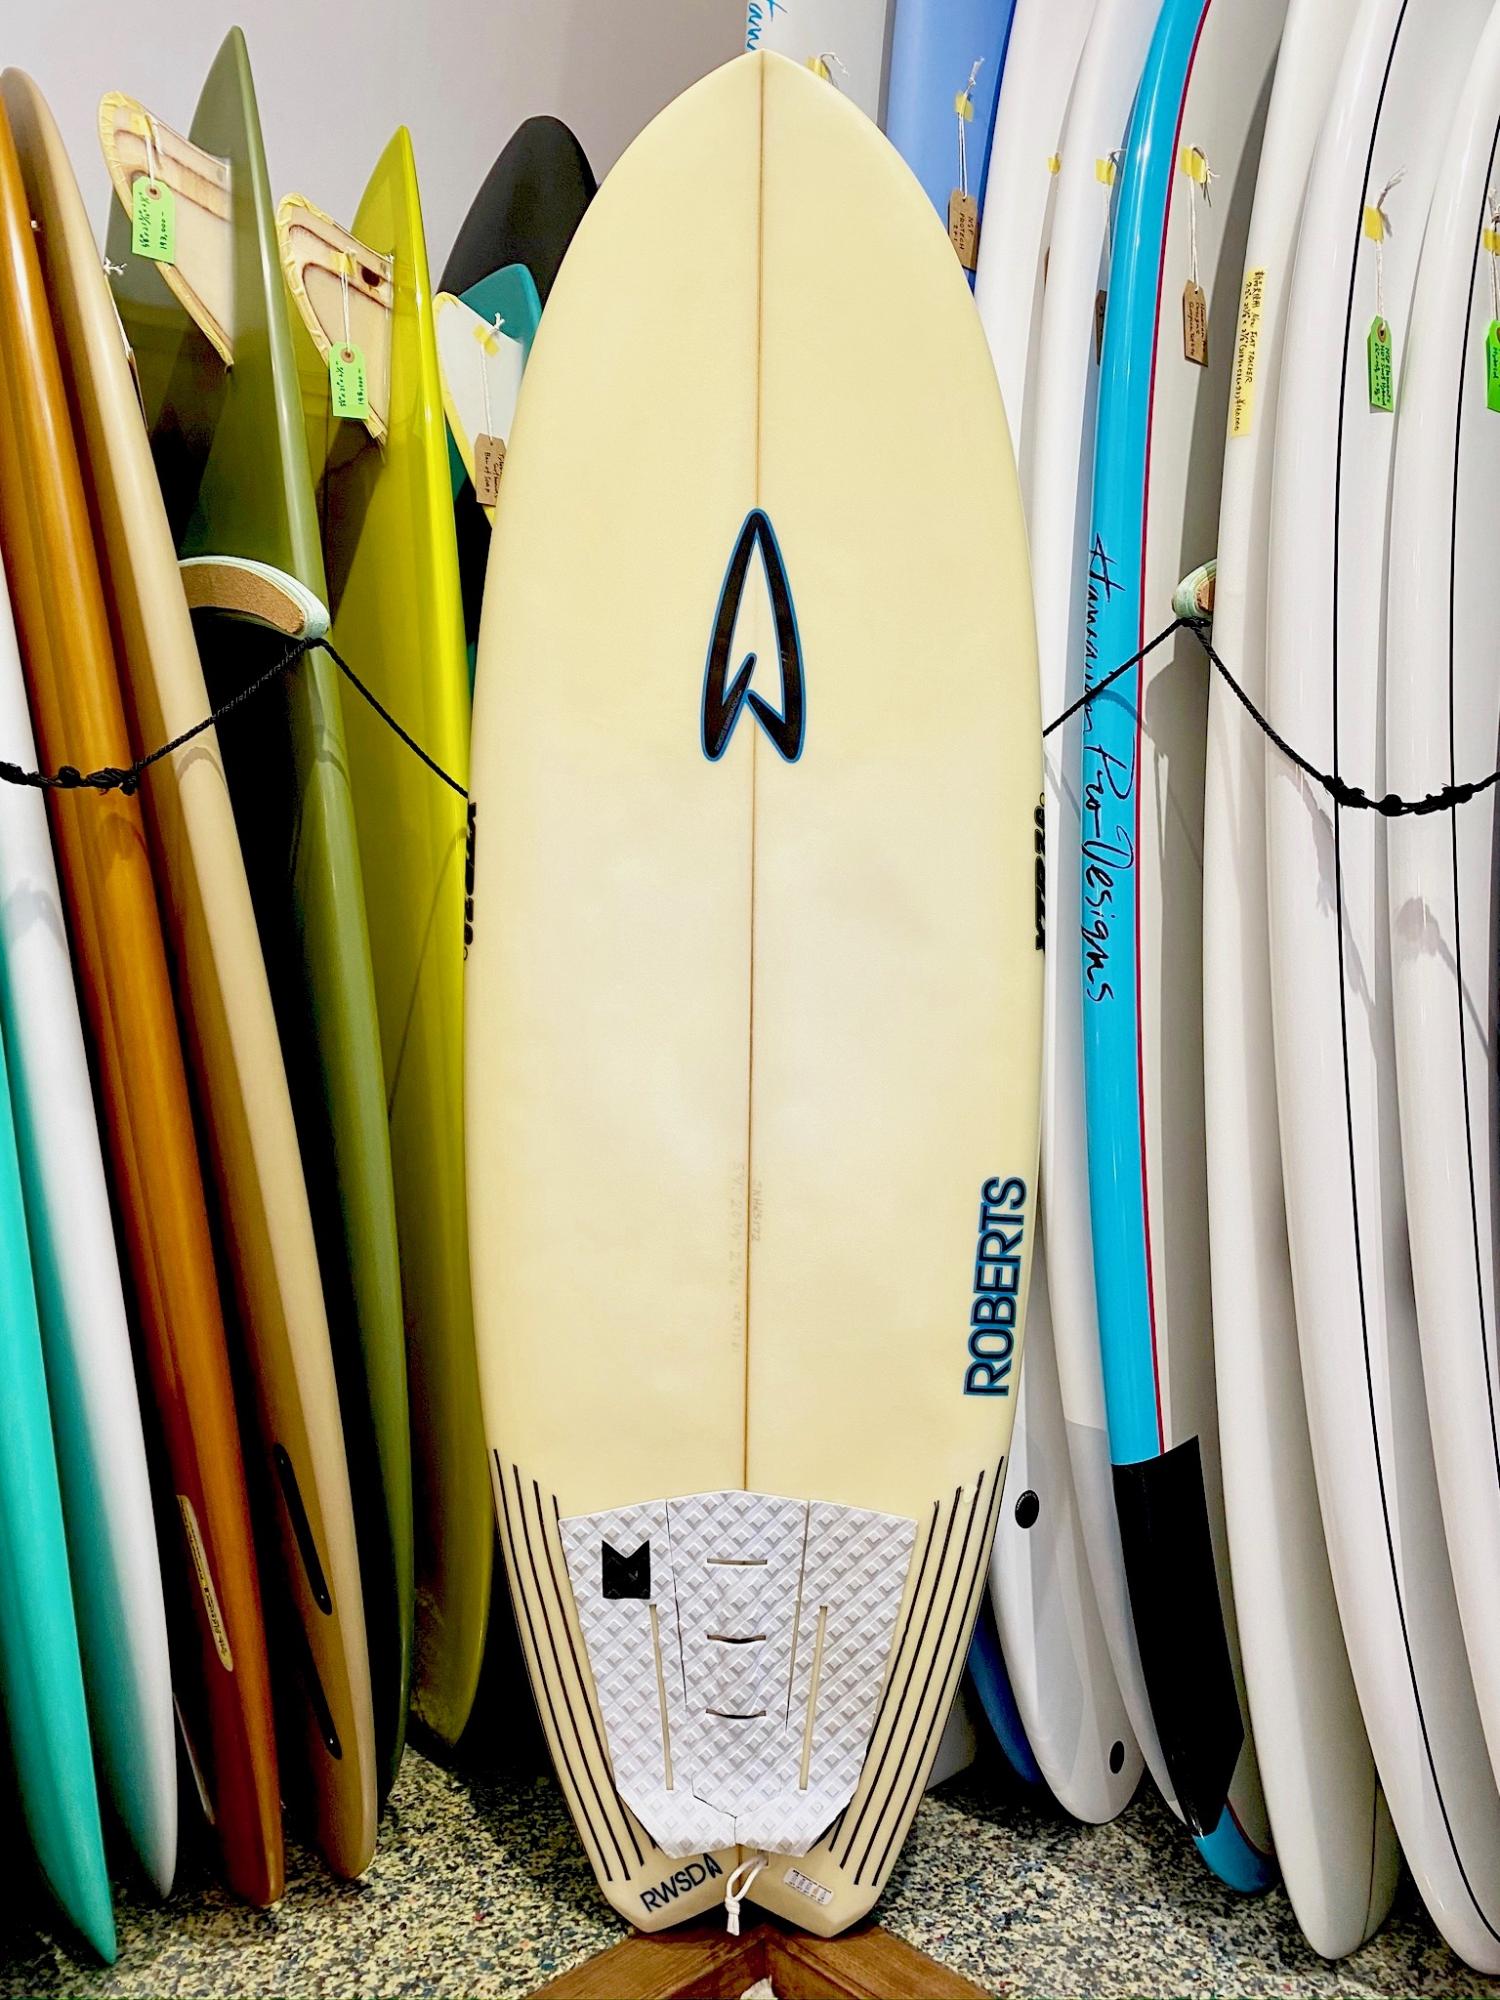 ROBERTS SURFBOARDS|site_title